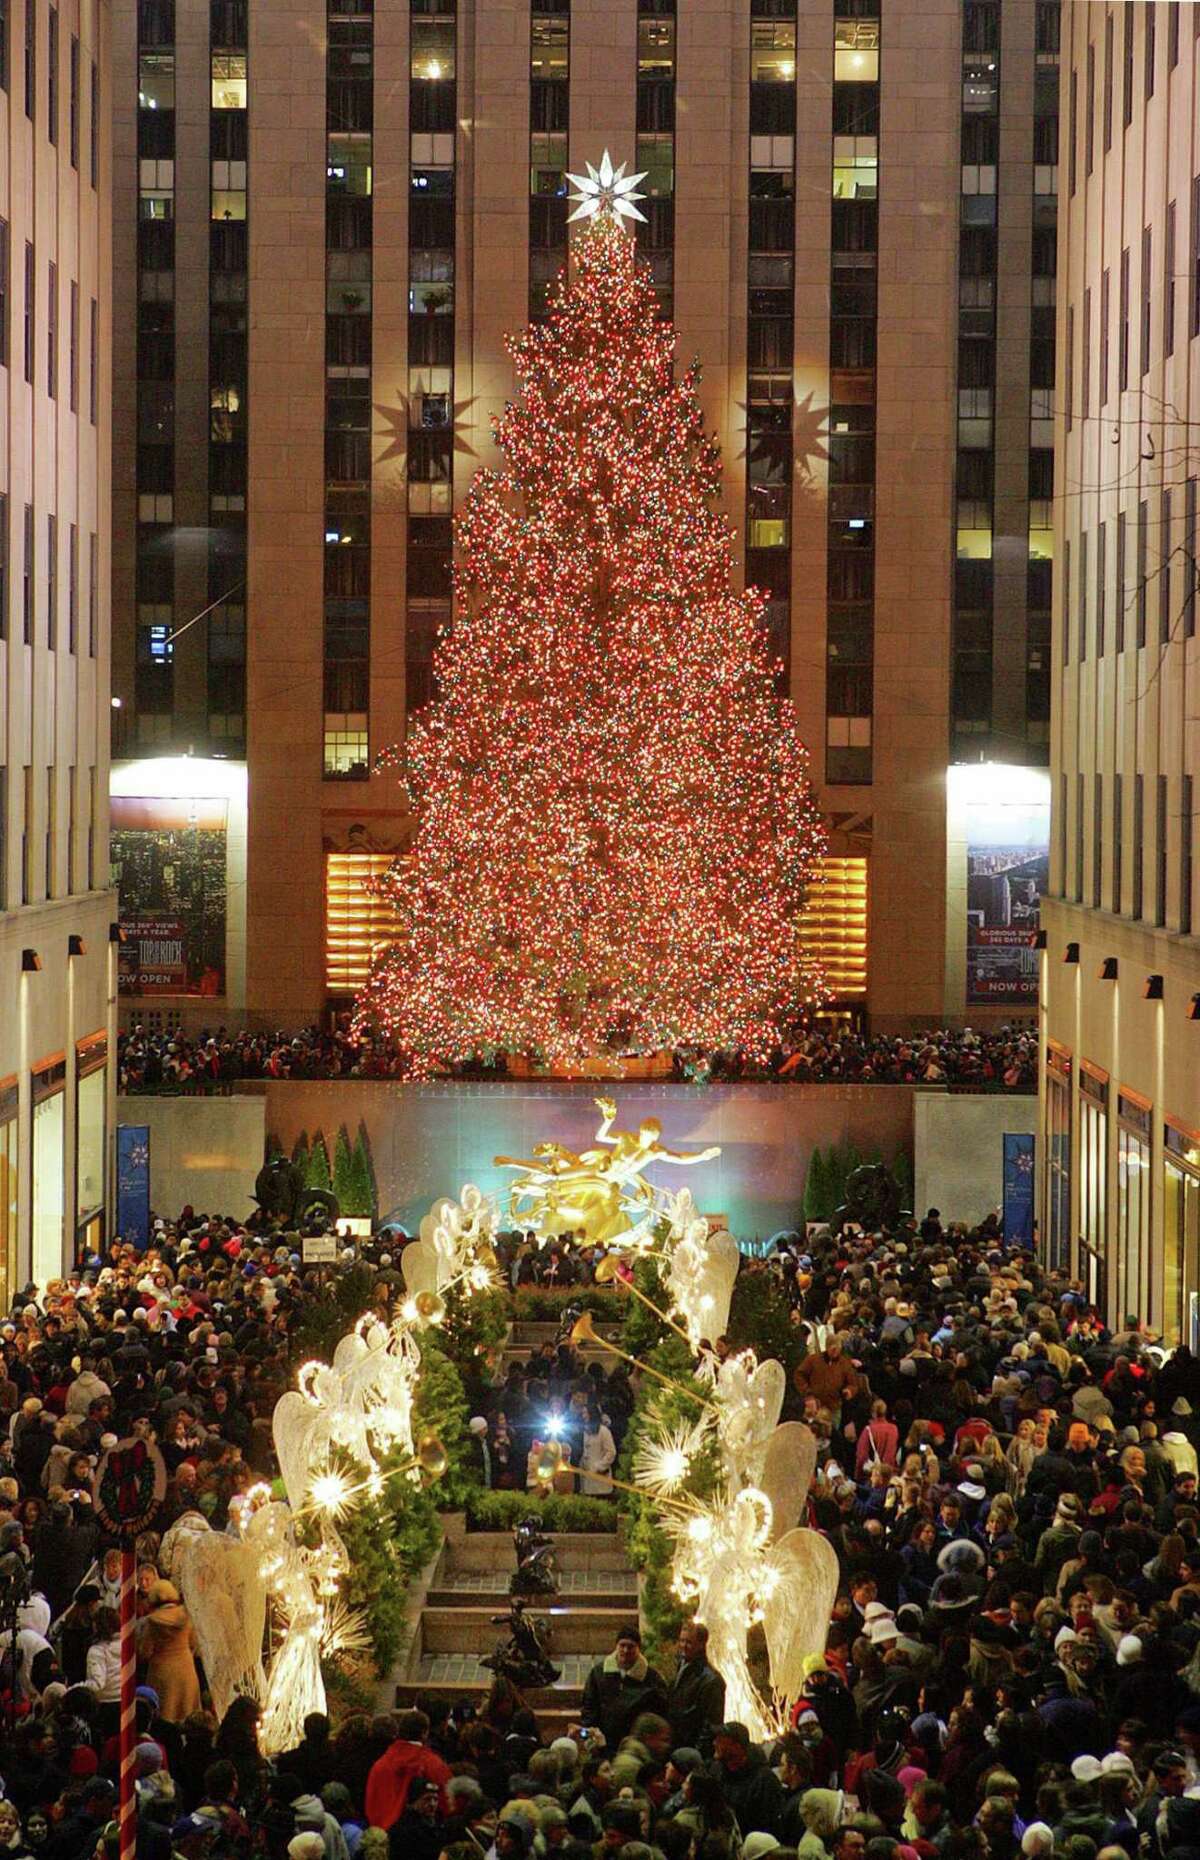 The Rockefeller Plaza is crowded with people looking at the Christmas tree in New York December 3, 2005. The 74 feet (22.55 m) tall Norway spruce from Wayne, N.J. weighs nine tons (8,165 kg), is lit with 30,000 lights and is topped with a Swarovski star. REUTERS/Dima Gavrysh